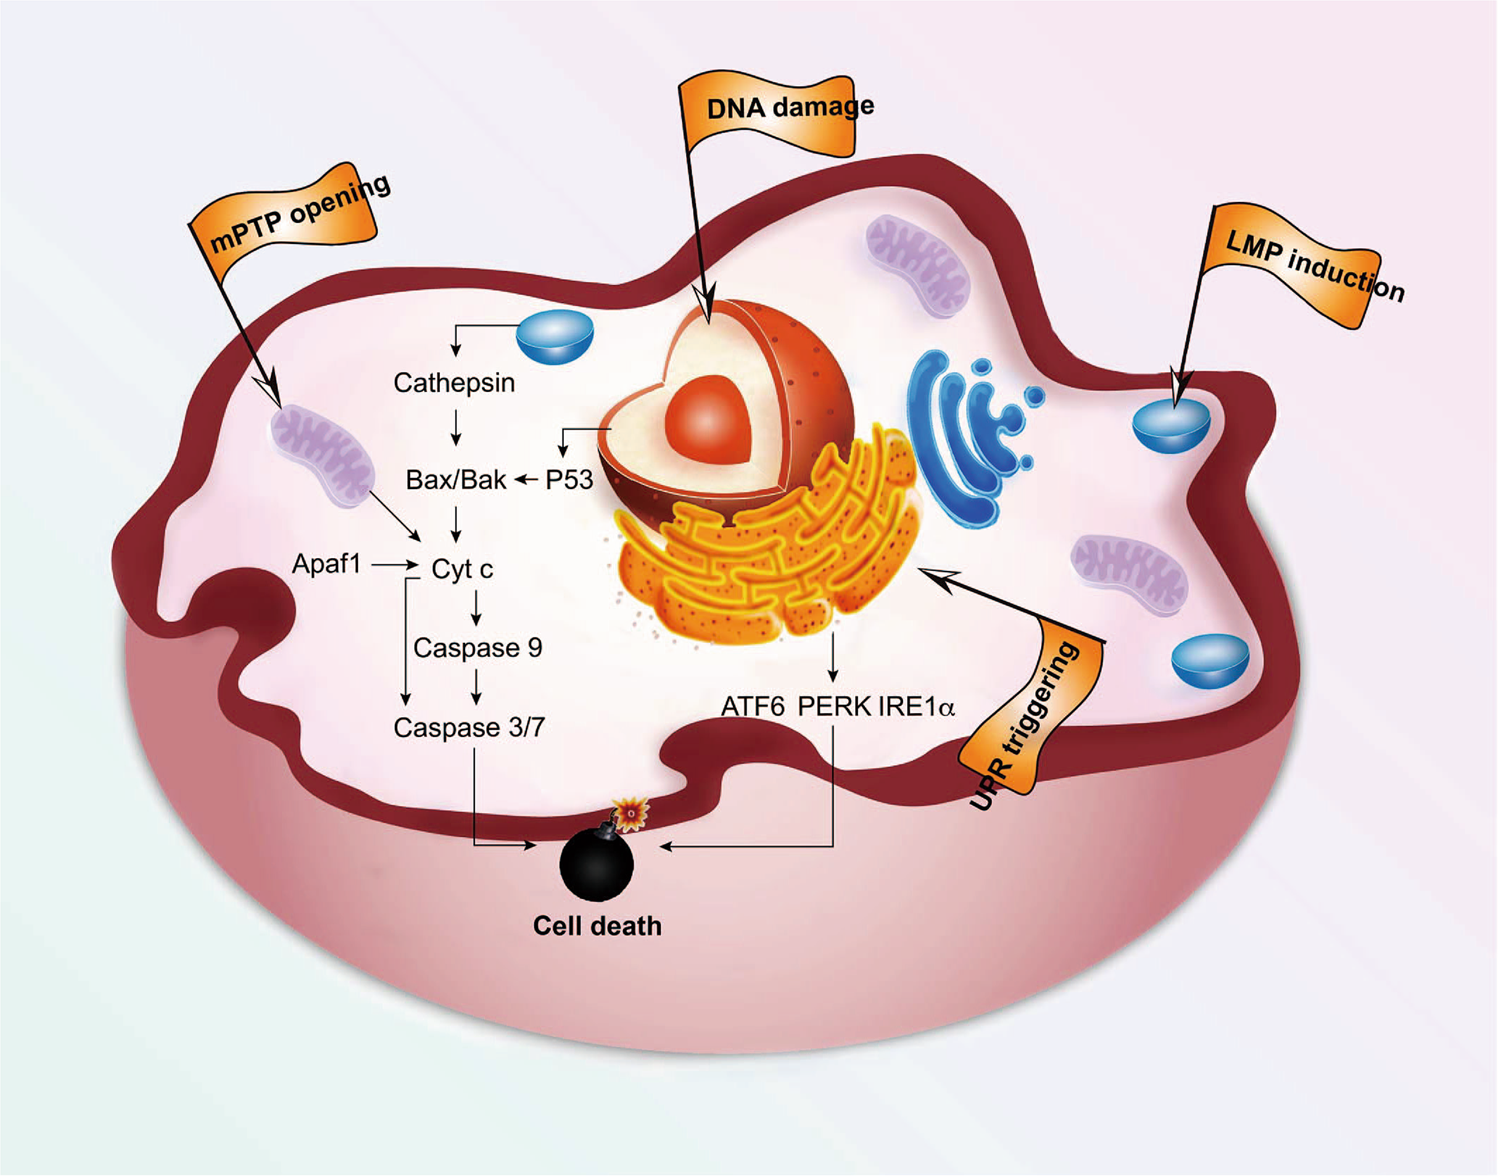 Organelle-targeted therapies: a comprehensive review on system